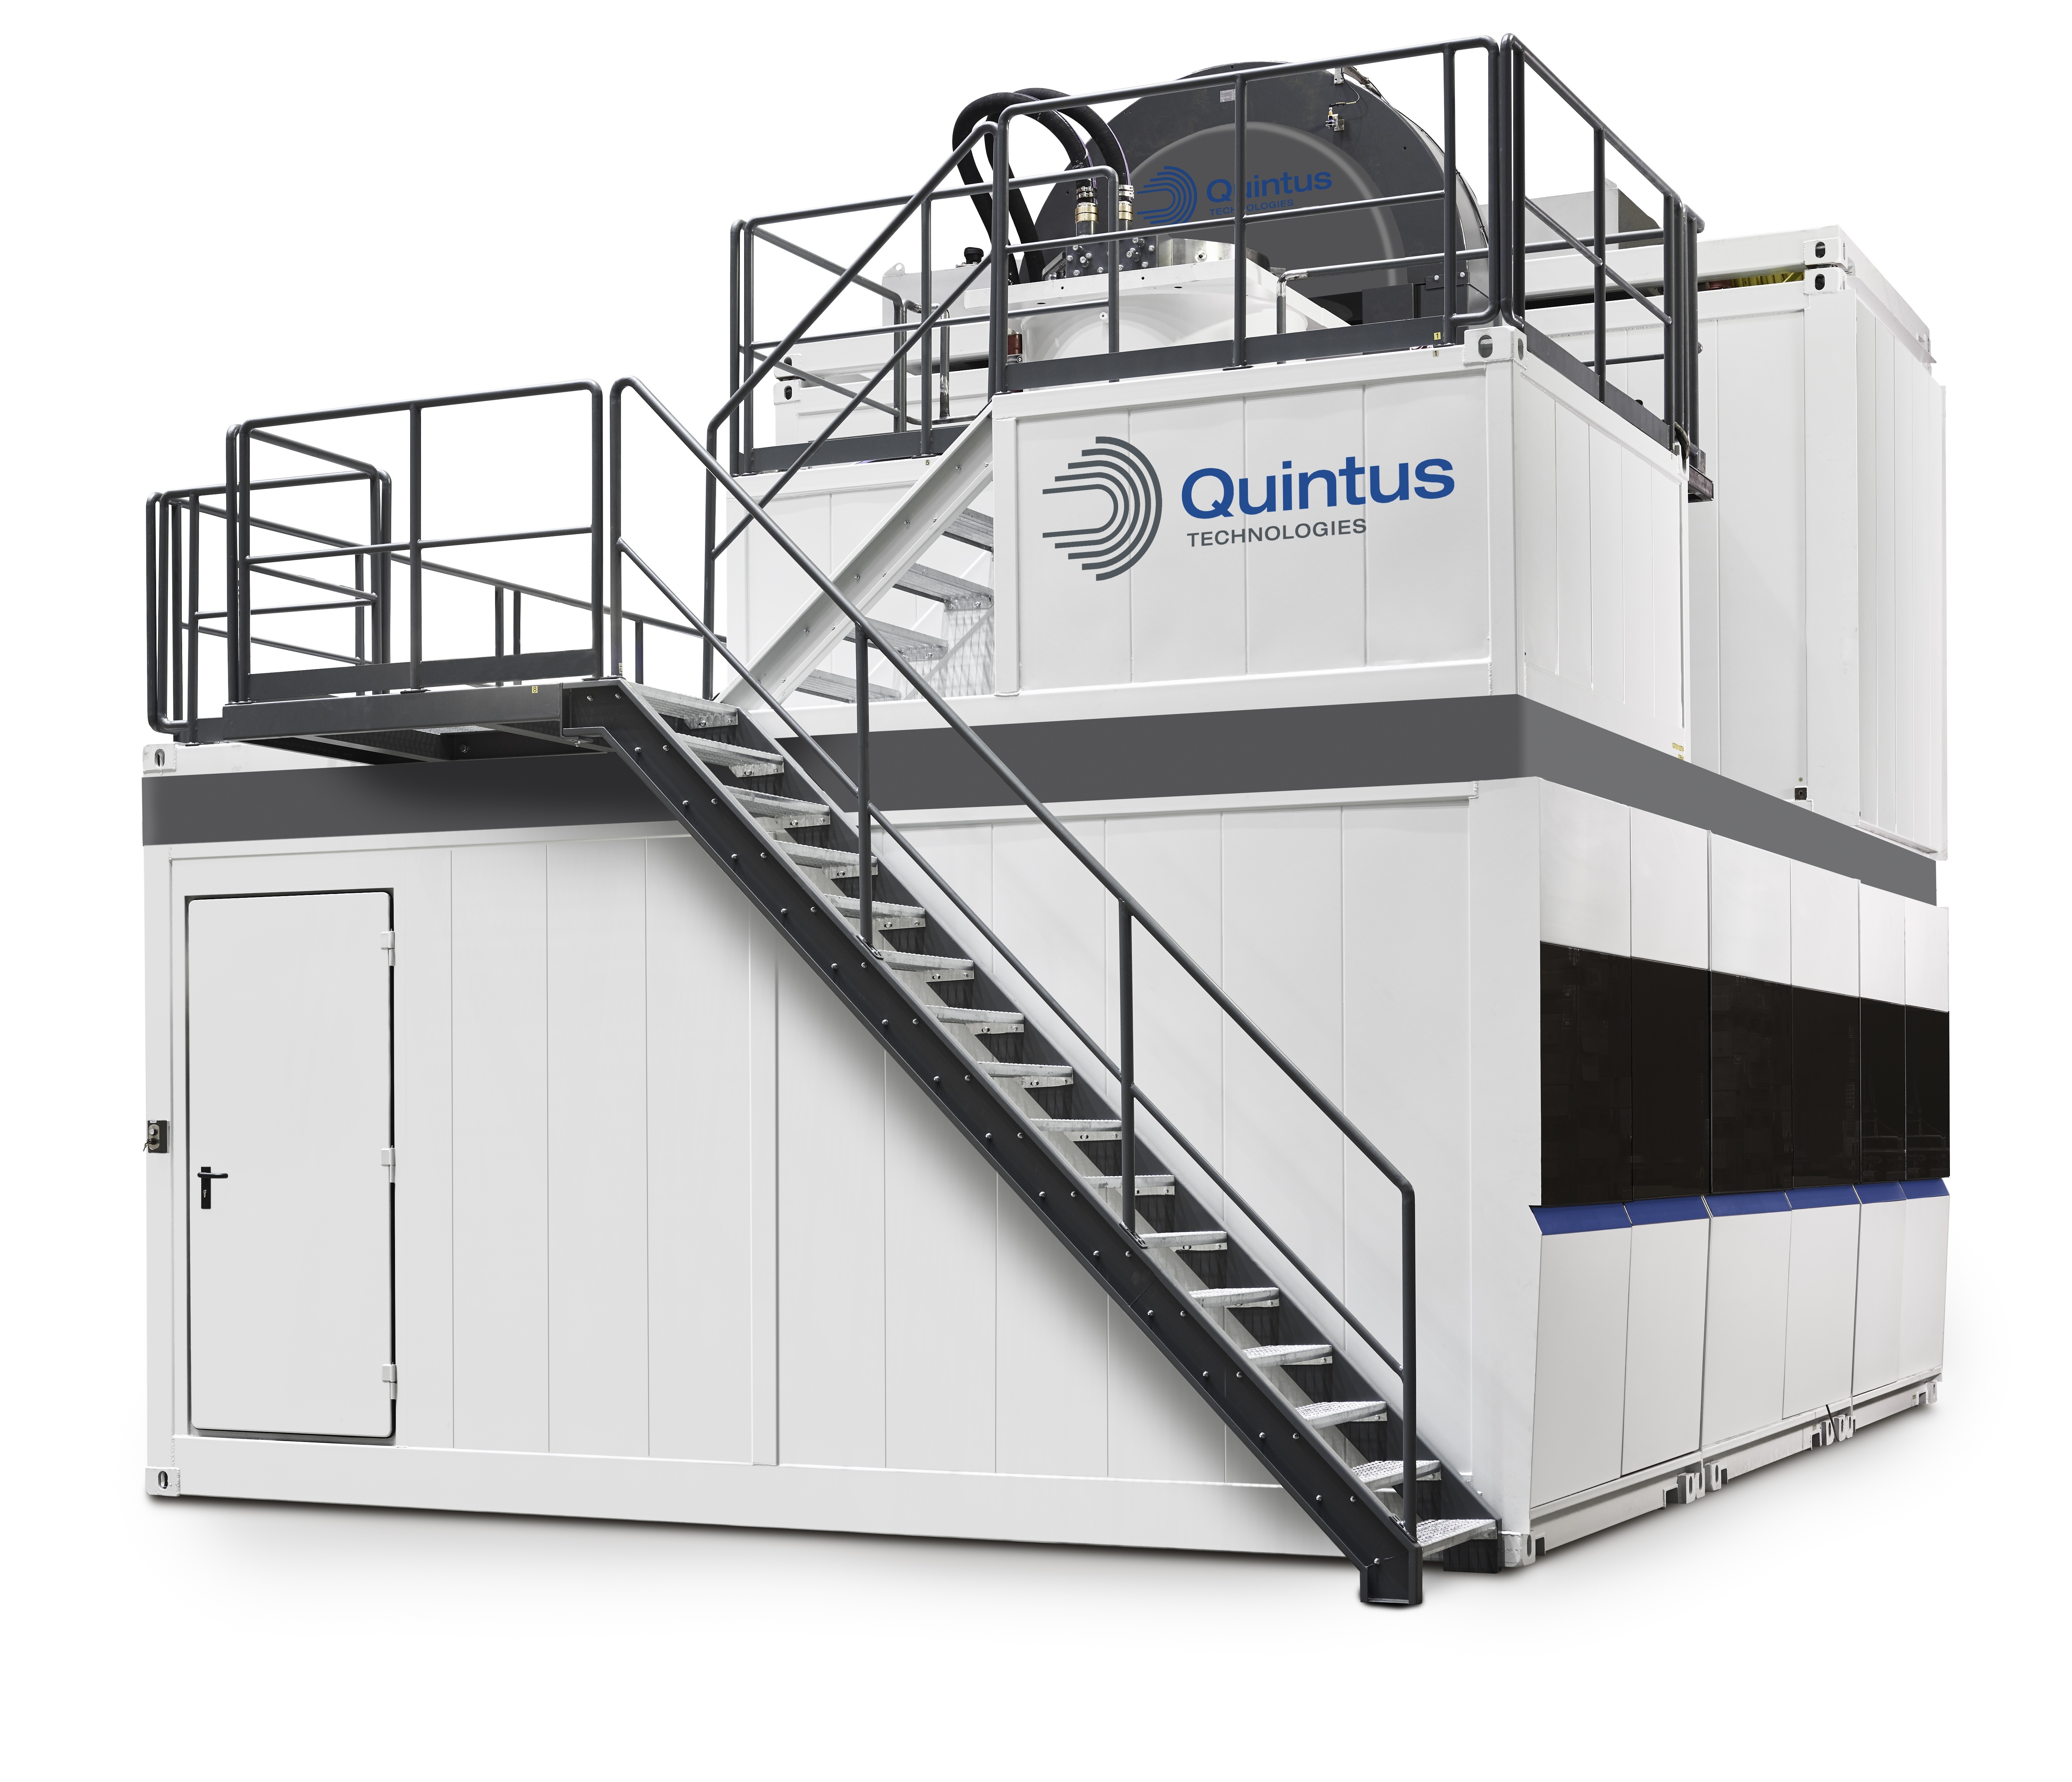 Paulo’s new Quintus HIP with uniform rapid cooling will be installed in the heat-treating specialist’s recently expanded facility. (Photo courtesy Quintus Technologies.)